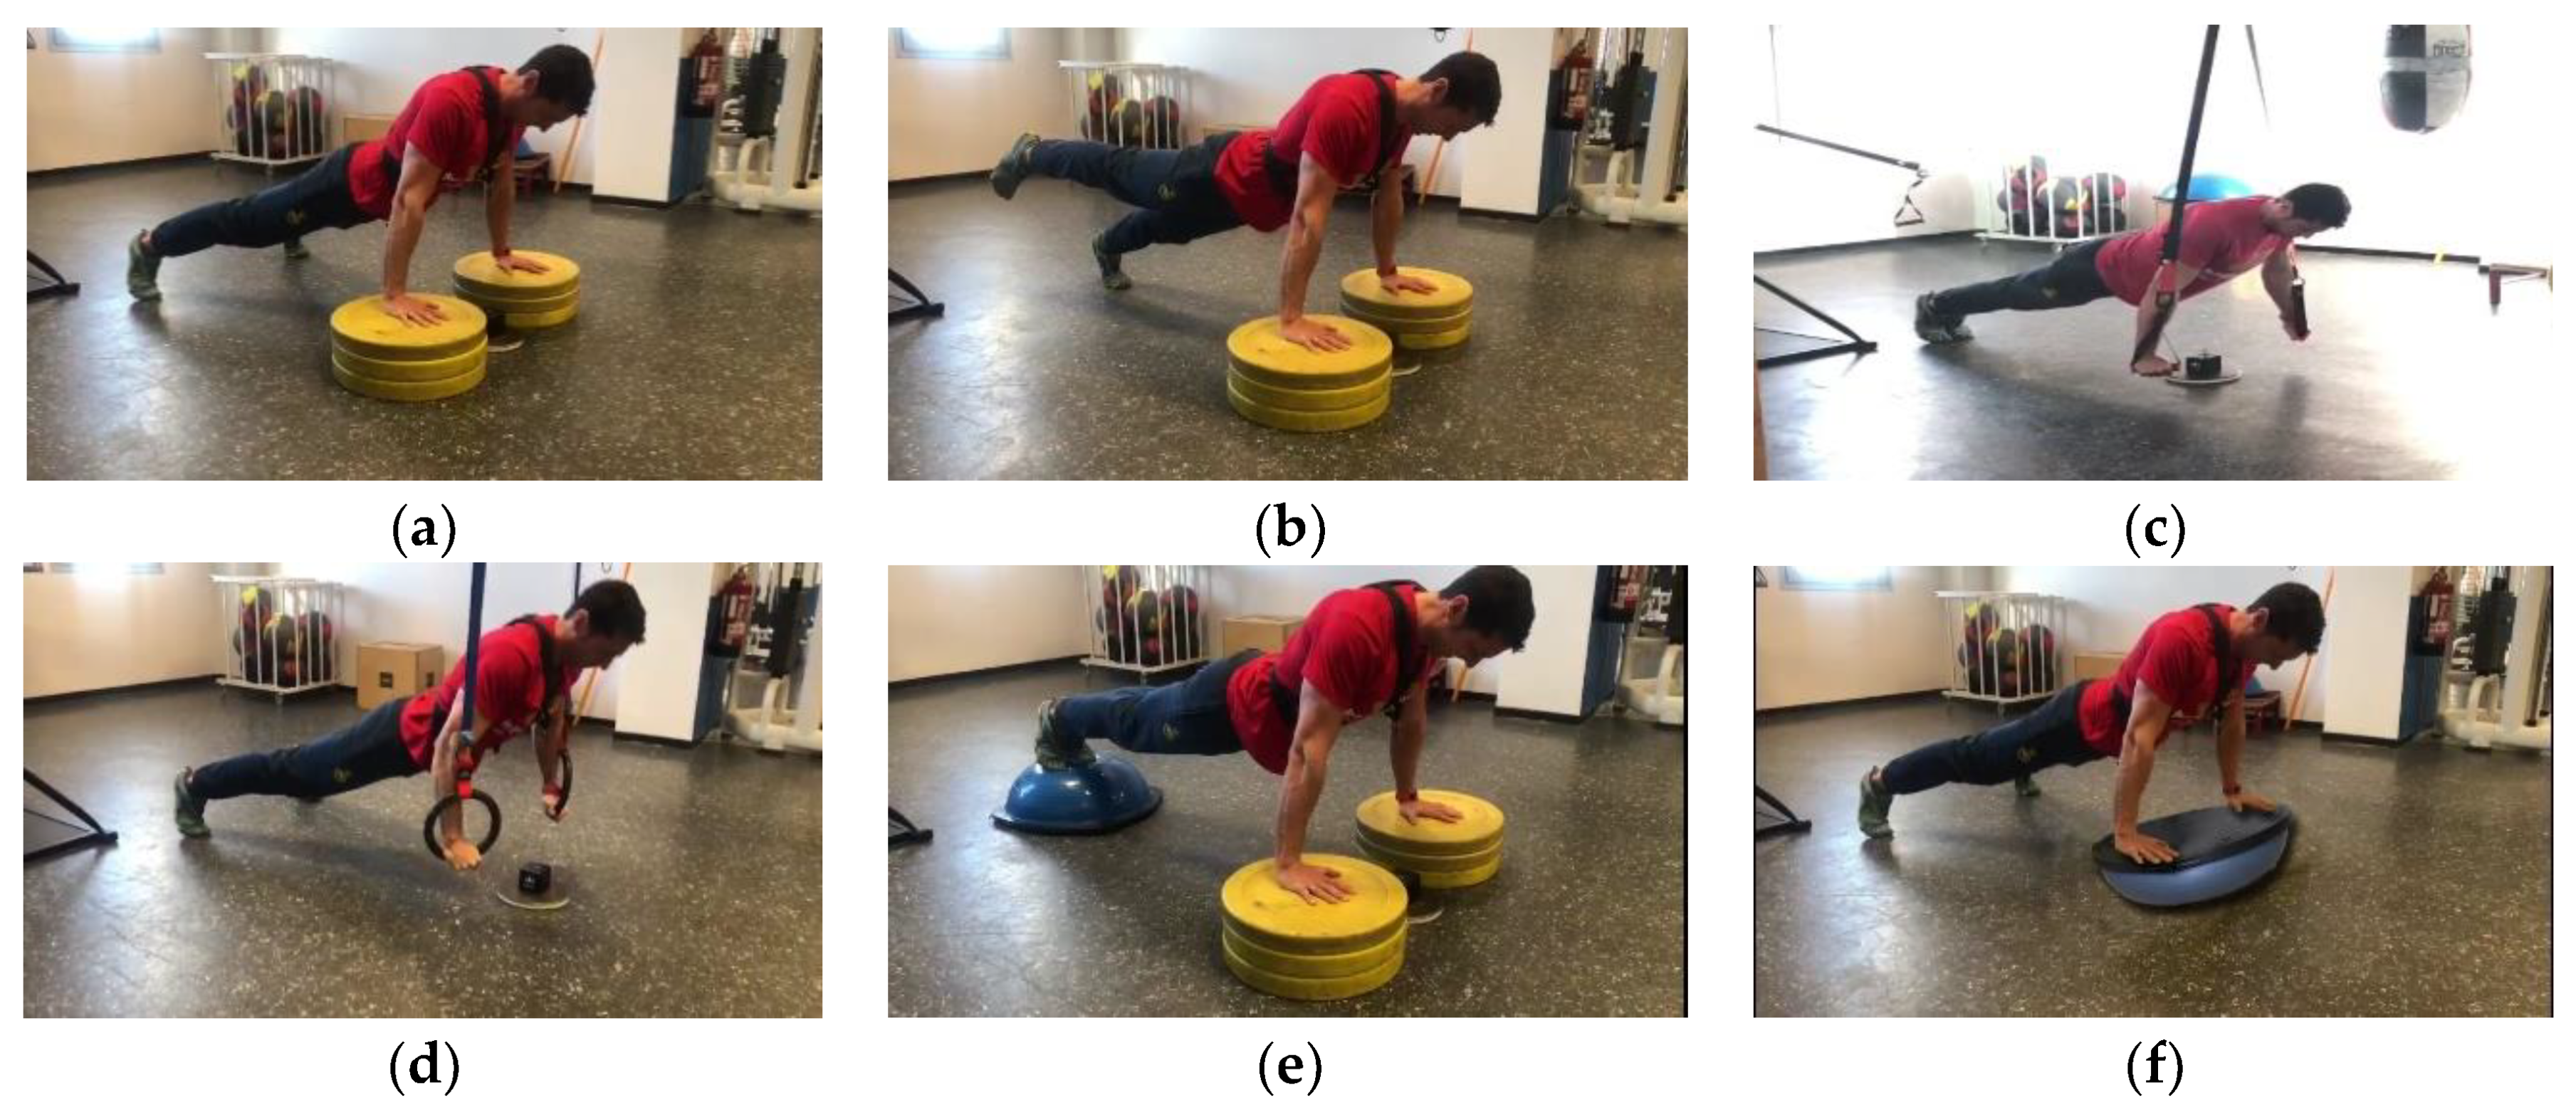 IJERPH | Free Full-Text | Assessment of the Speed and Power of Push-Ups  Performed on Surfaces with Different Degrees of Instability